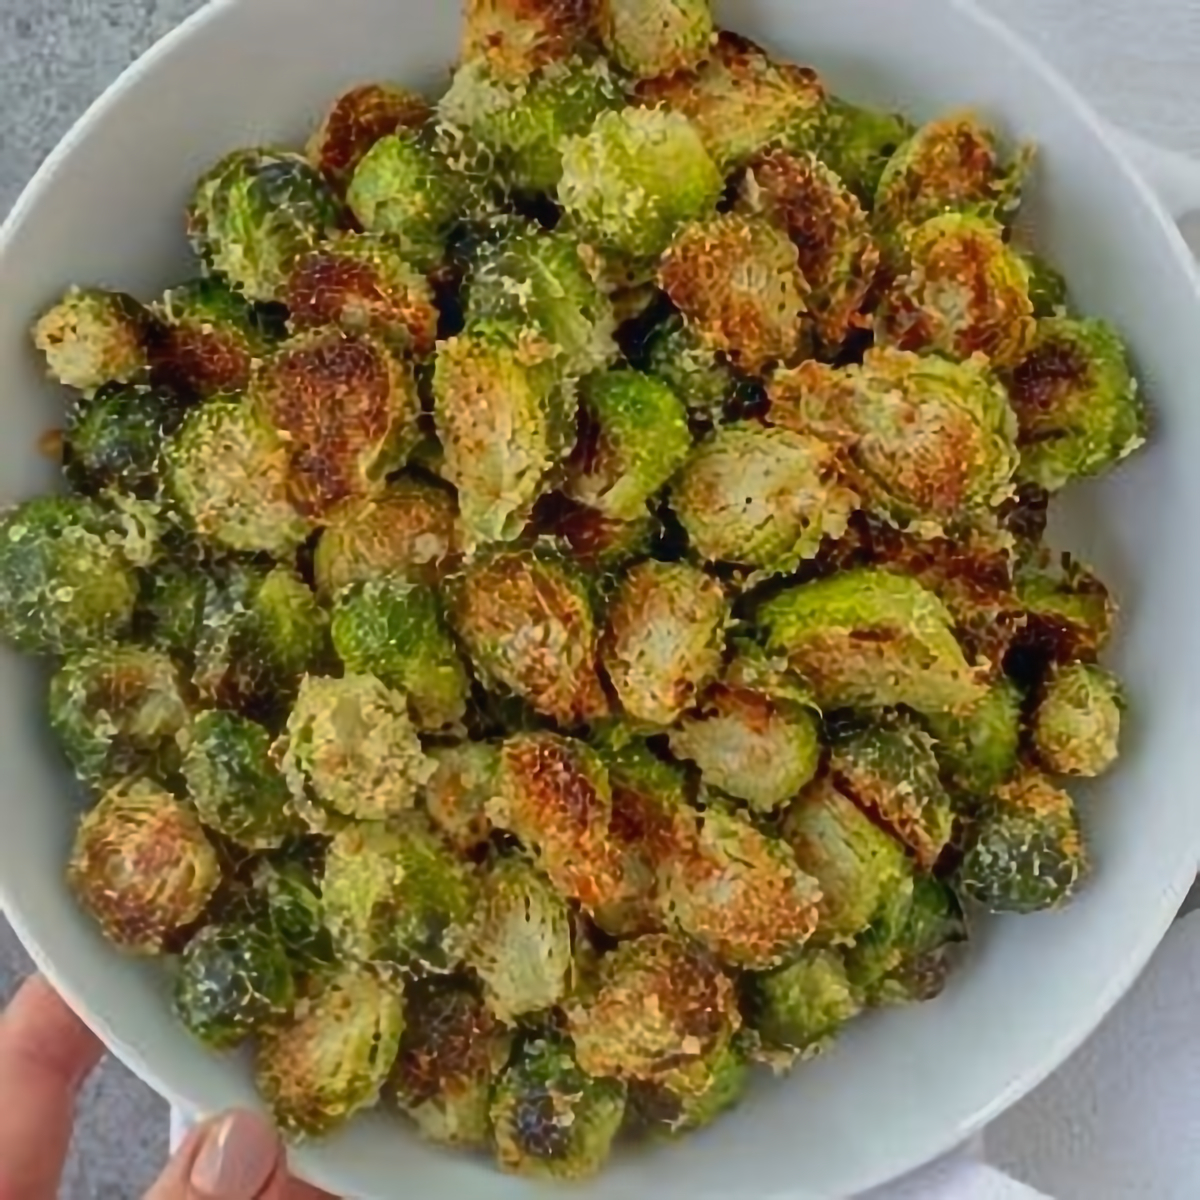 10. Crispy Garlic Parmesan Brussels Sprouts - easy brussel sprouts recipes